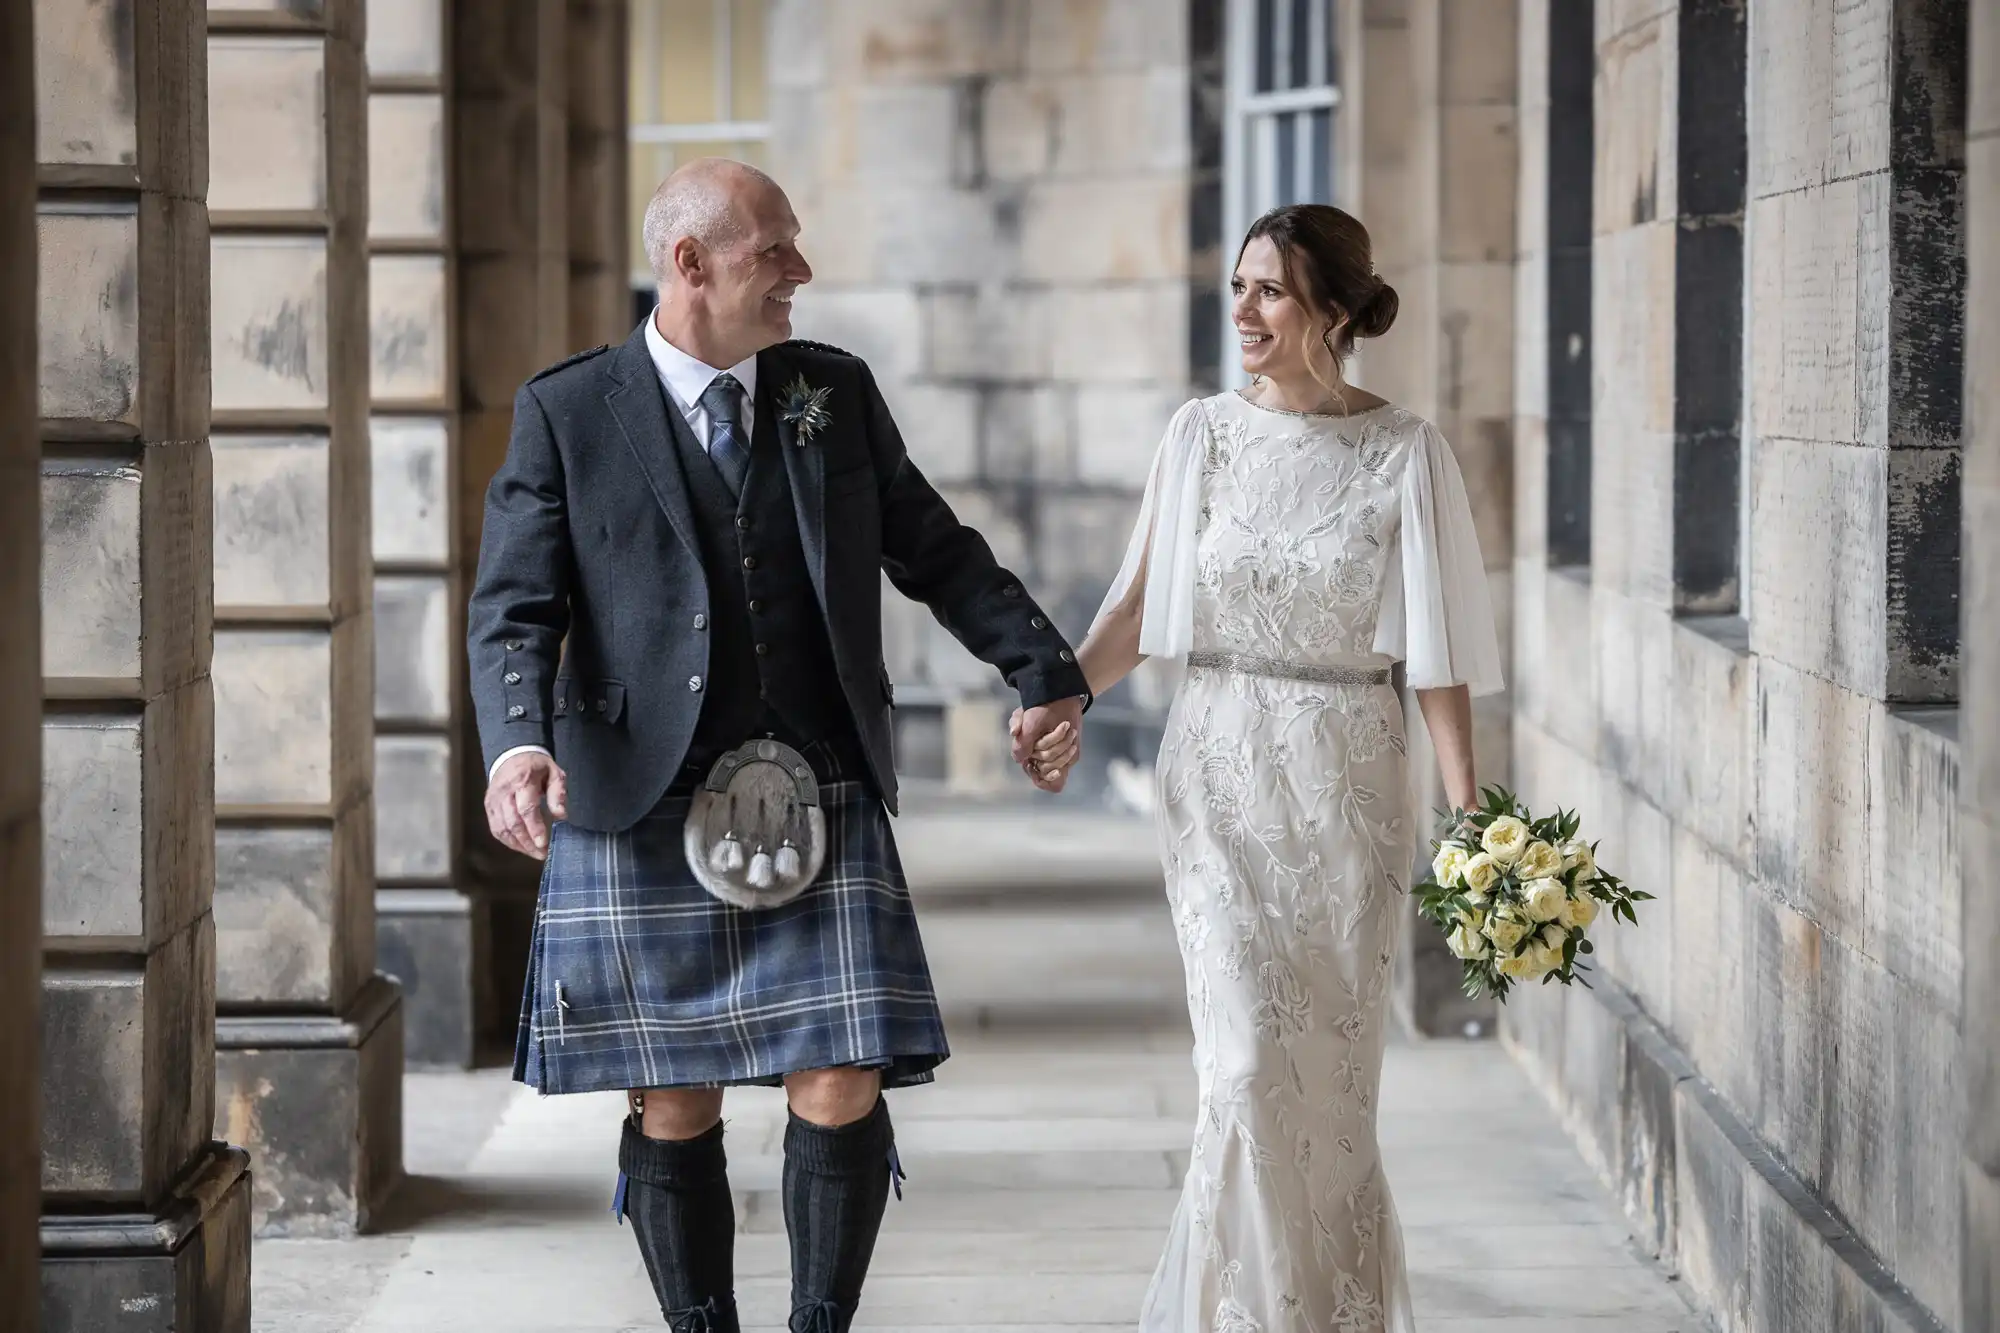 A couple, the man in a kilt and the woman in a white dress holding a bouquet, walk hand in hand in a stone corridor, both smiling at each other.